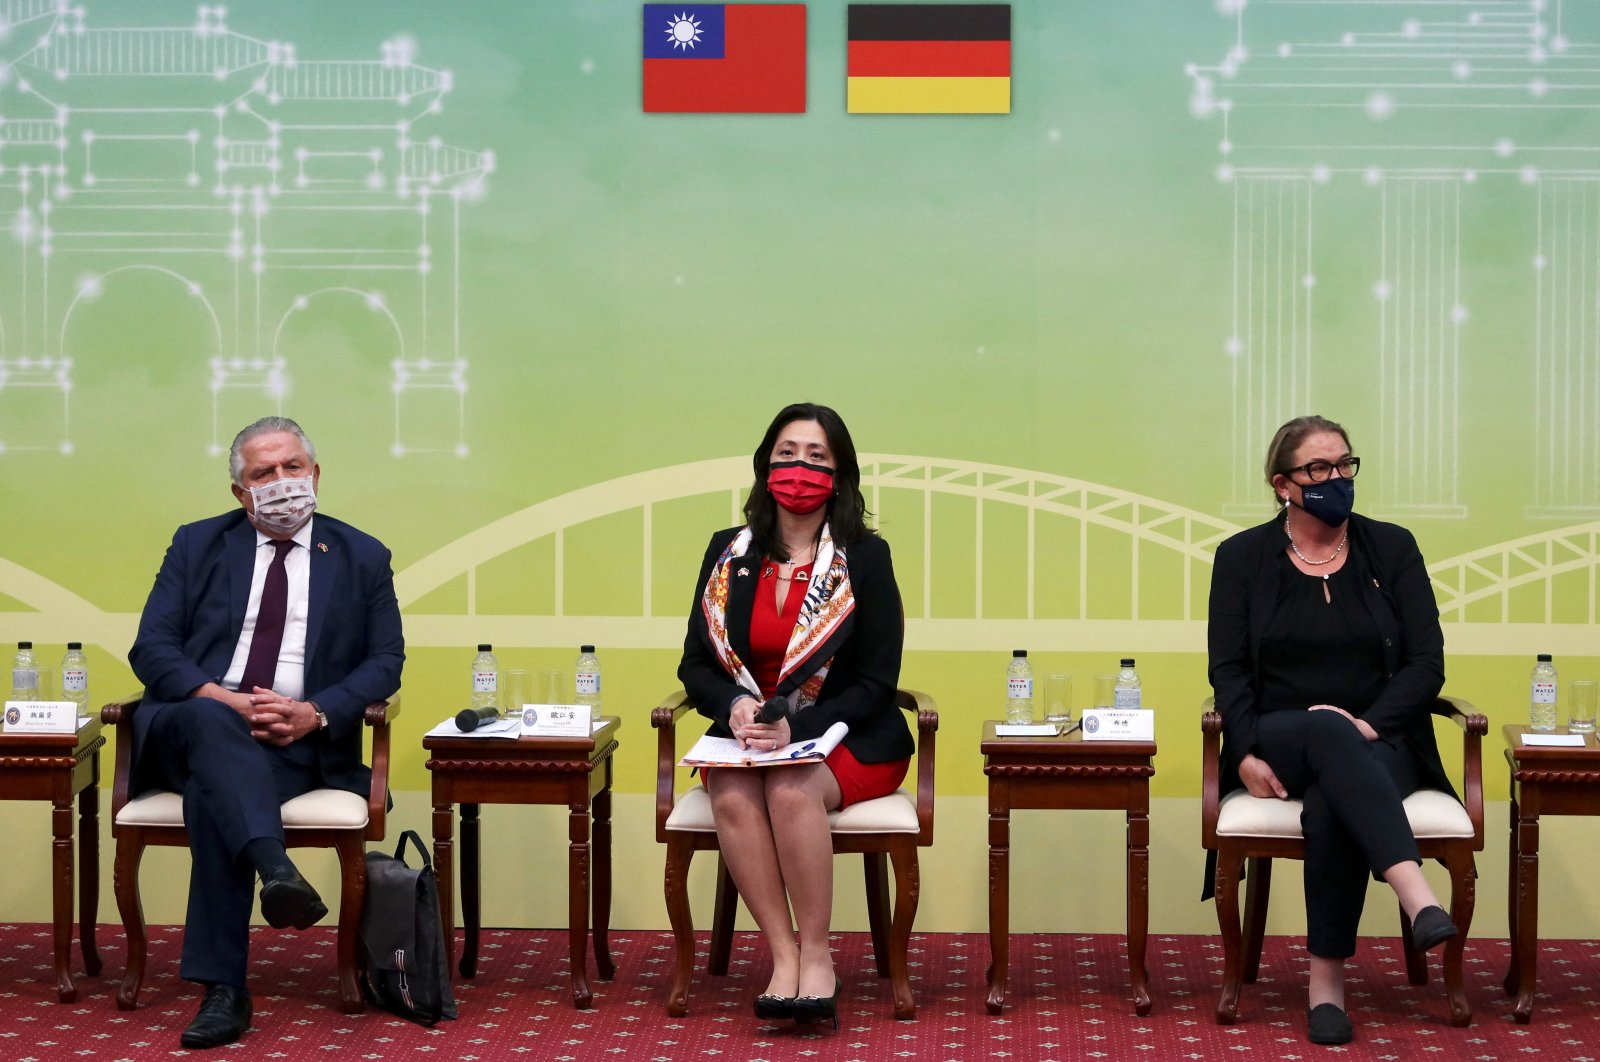 German lawmakers Klaus-Peter Willsch and Katrin Budde attend a news conference with Taiwanese Foreign Ministry spokesperson Joanne Ou. Taipei, Taiwan, Oct. 6, 2022. (REUTERS Photo)